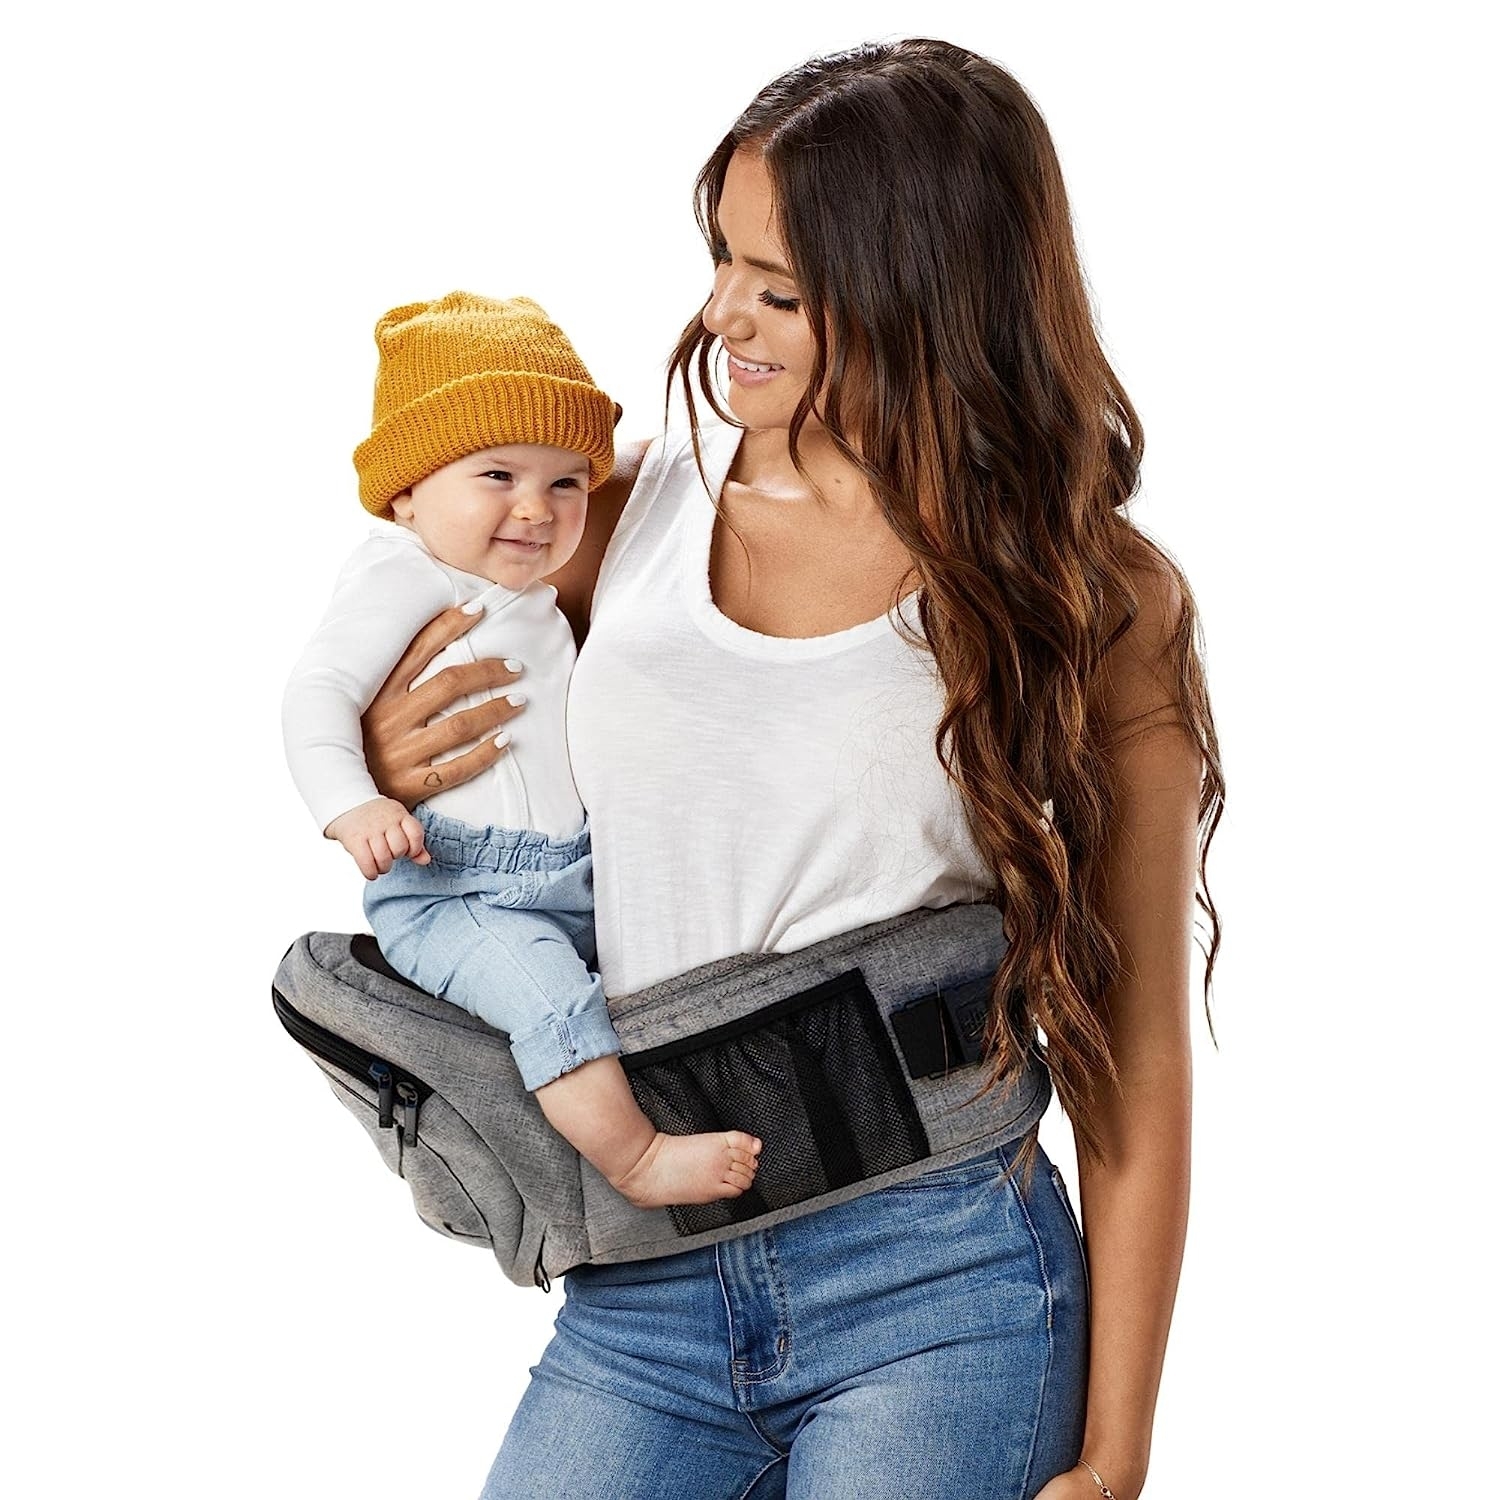 A model with the carrier around their waist and cradling a baby